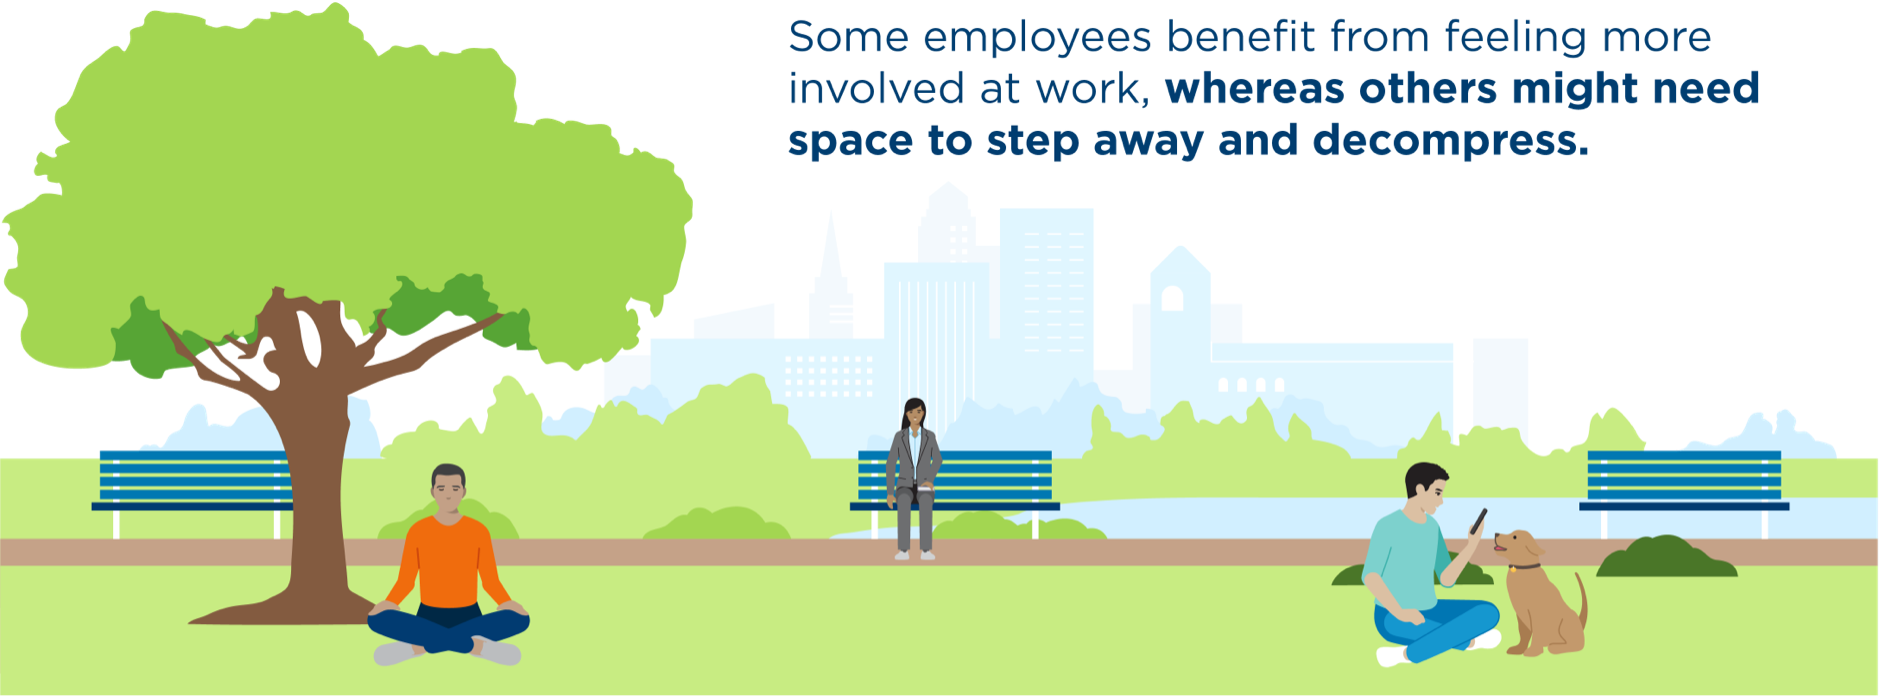 Some employees benefit from feeling more involved at work, whereas others might need space to step away and decompress.